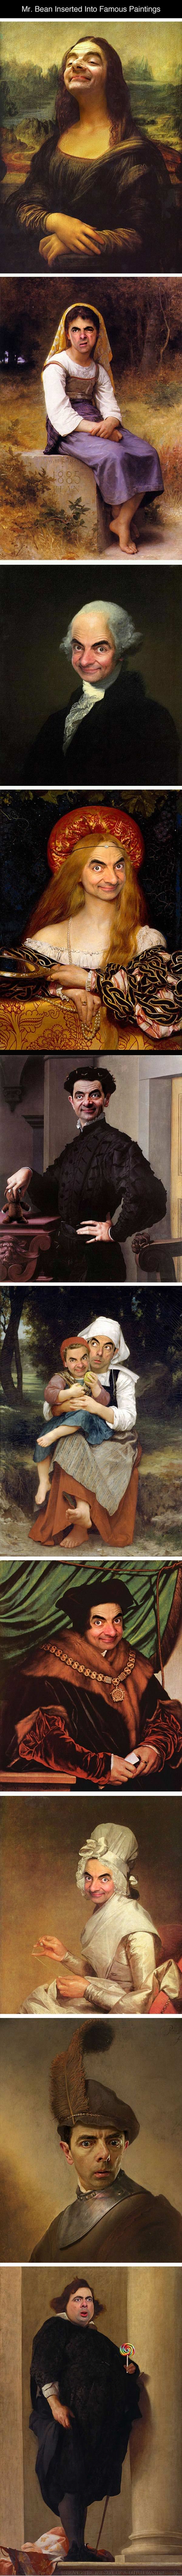 My Bean In Famous Paintings